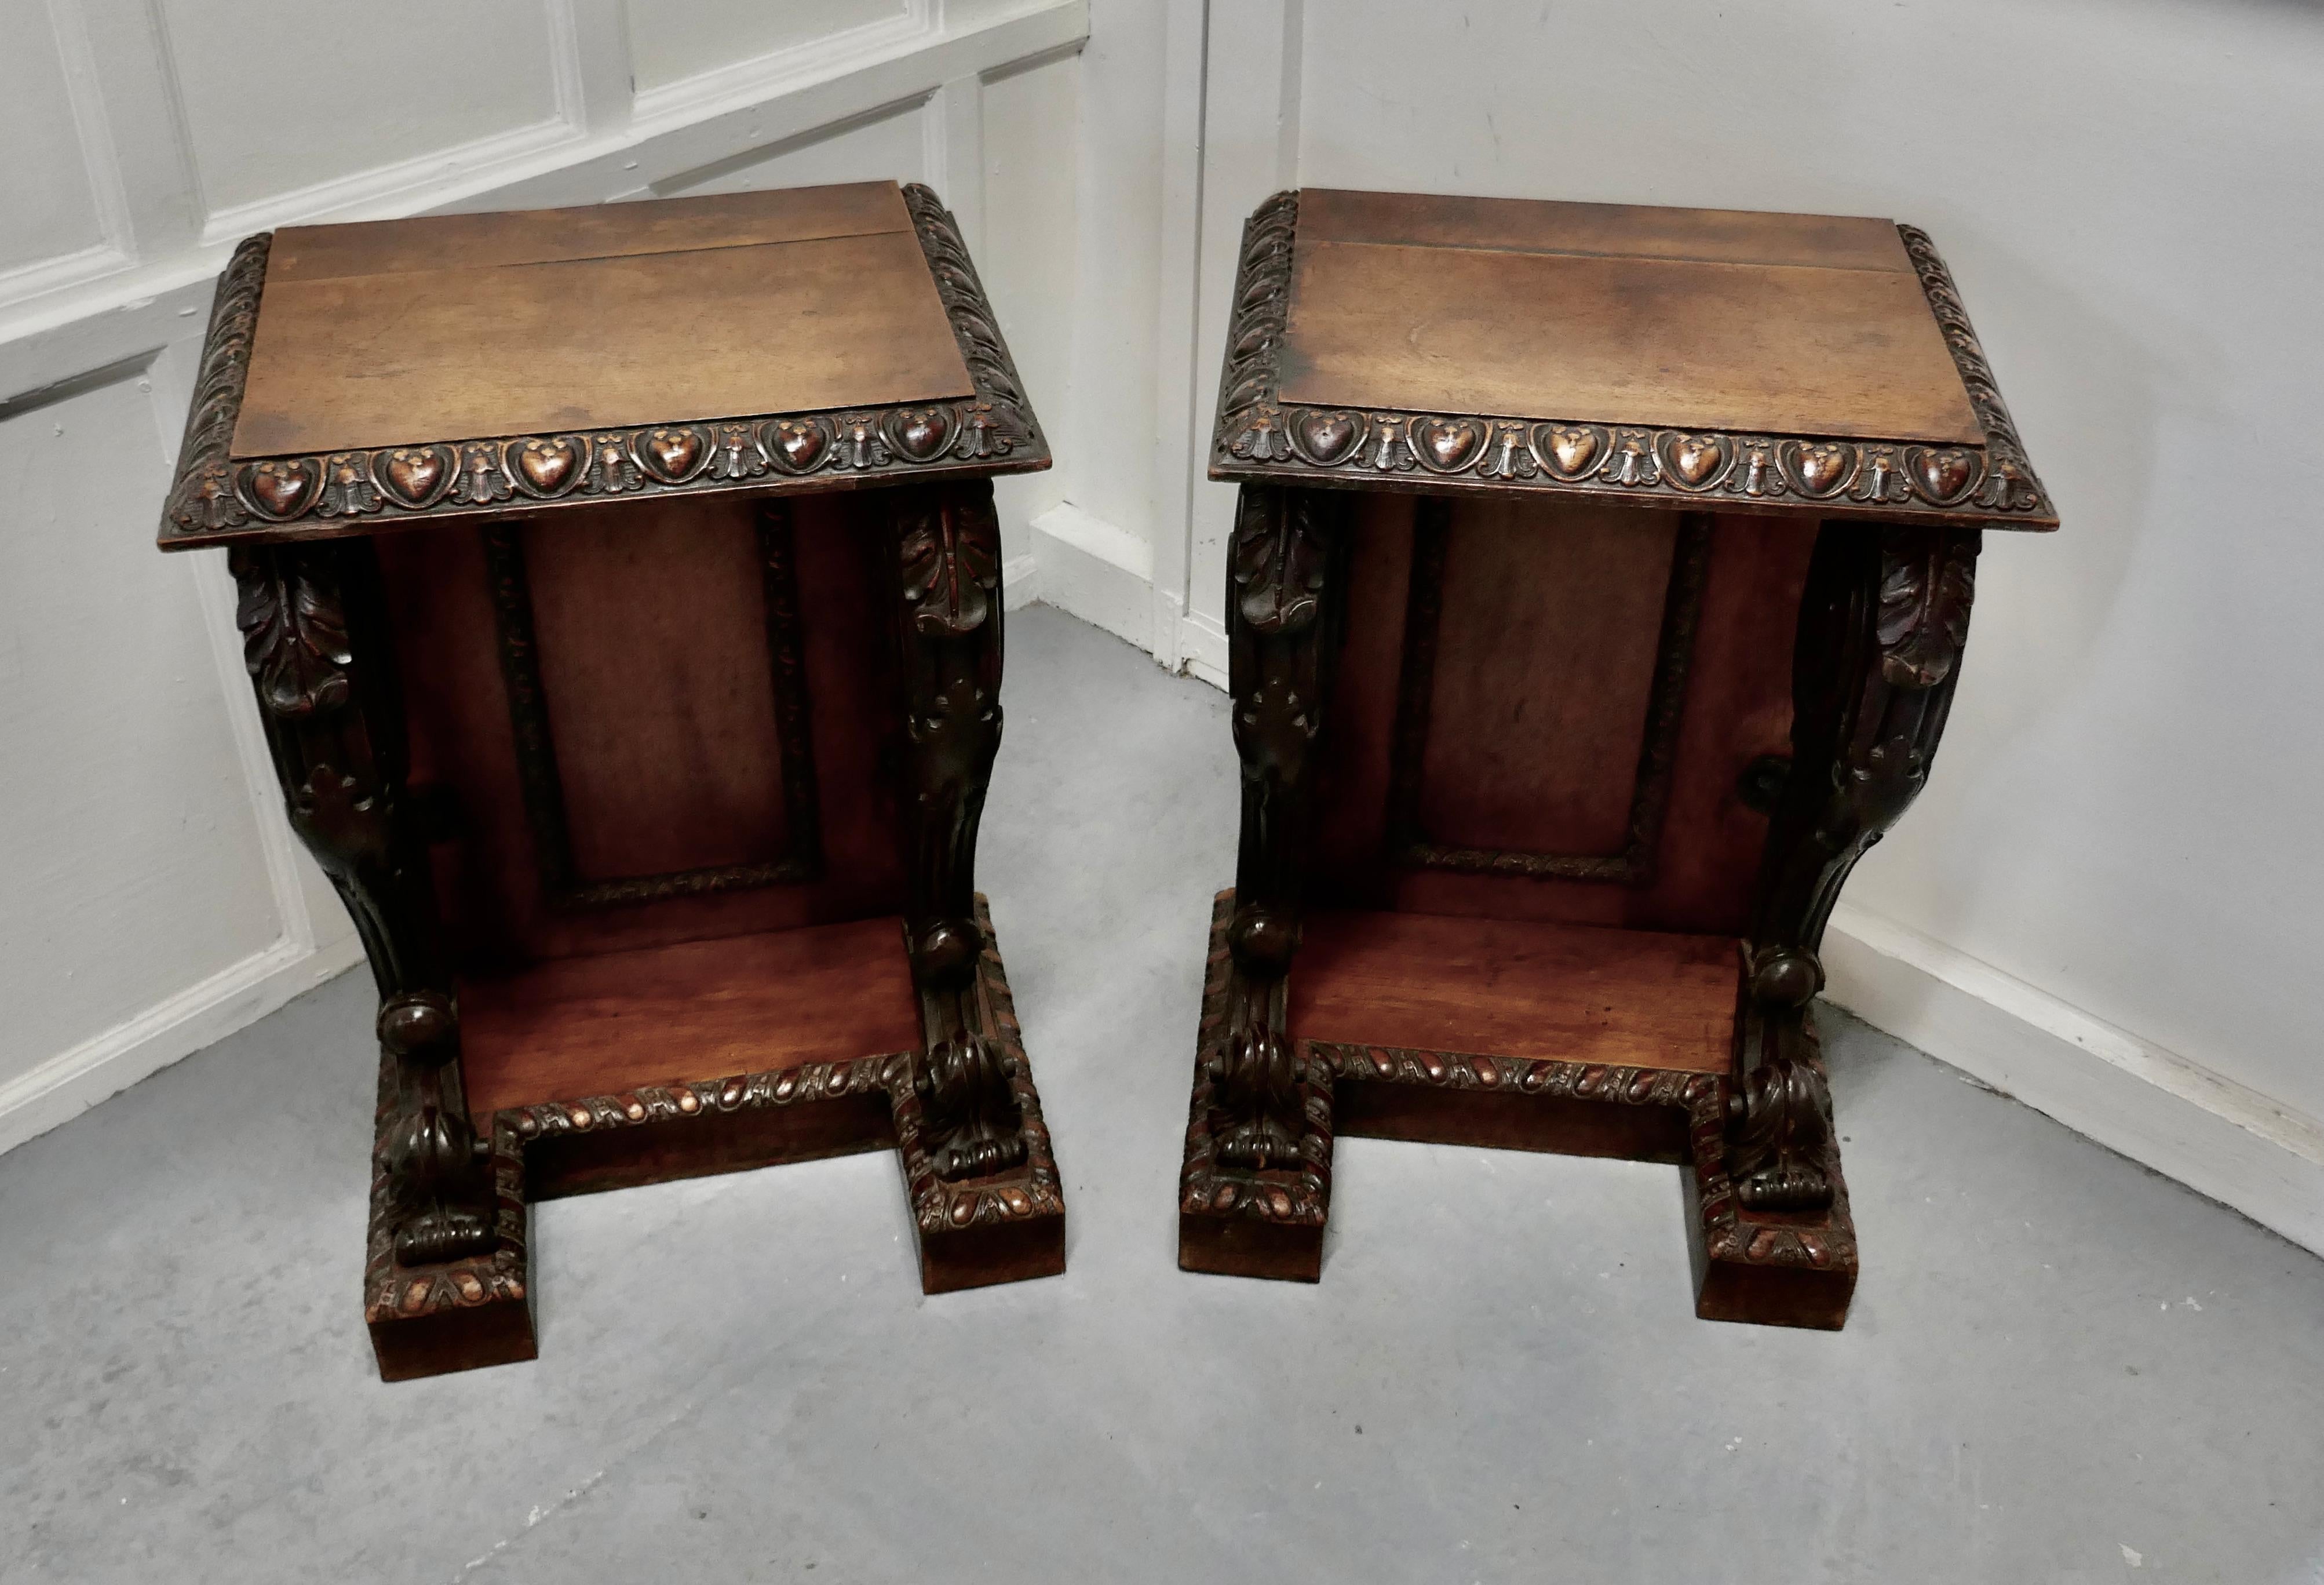 A pair of 19th century Art Nouveau Gothic carved oak console pedestals

A good pair of pedestals, made in oak with the most wonderful wide carved border to their table tops
The lower part of the pedestals have 2 Large Acanthus Leaf Scrolls